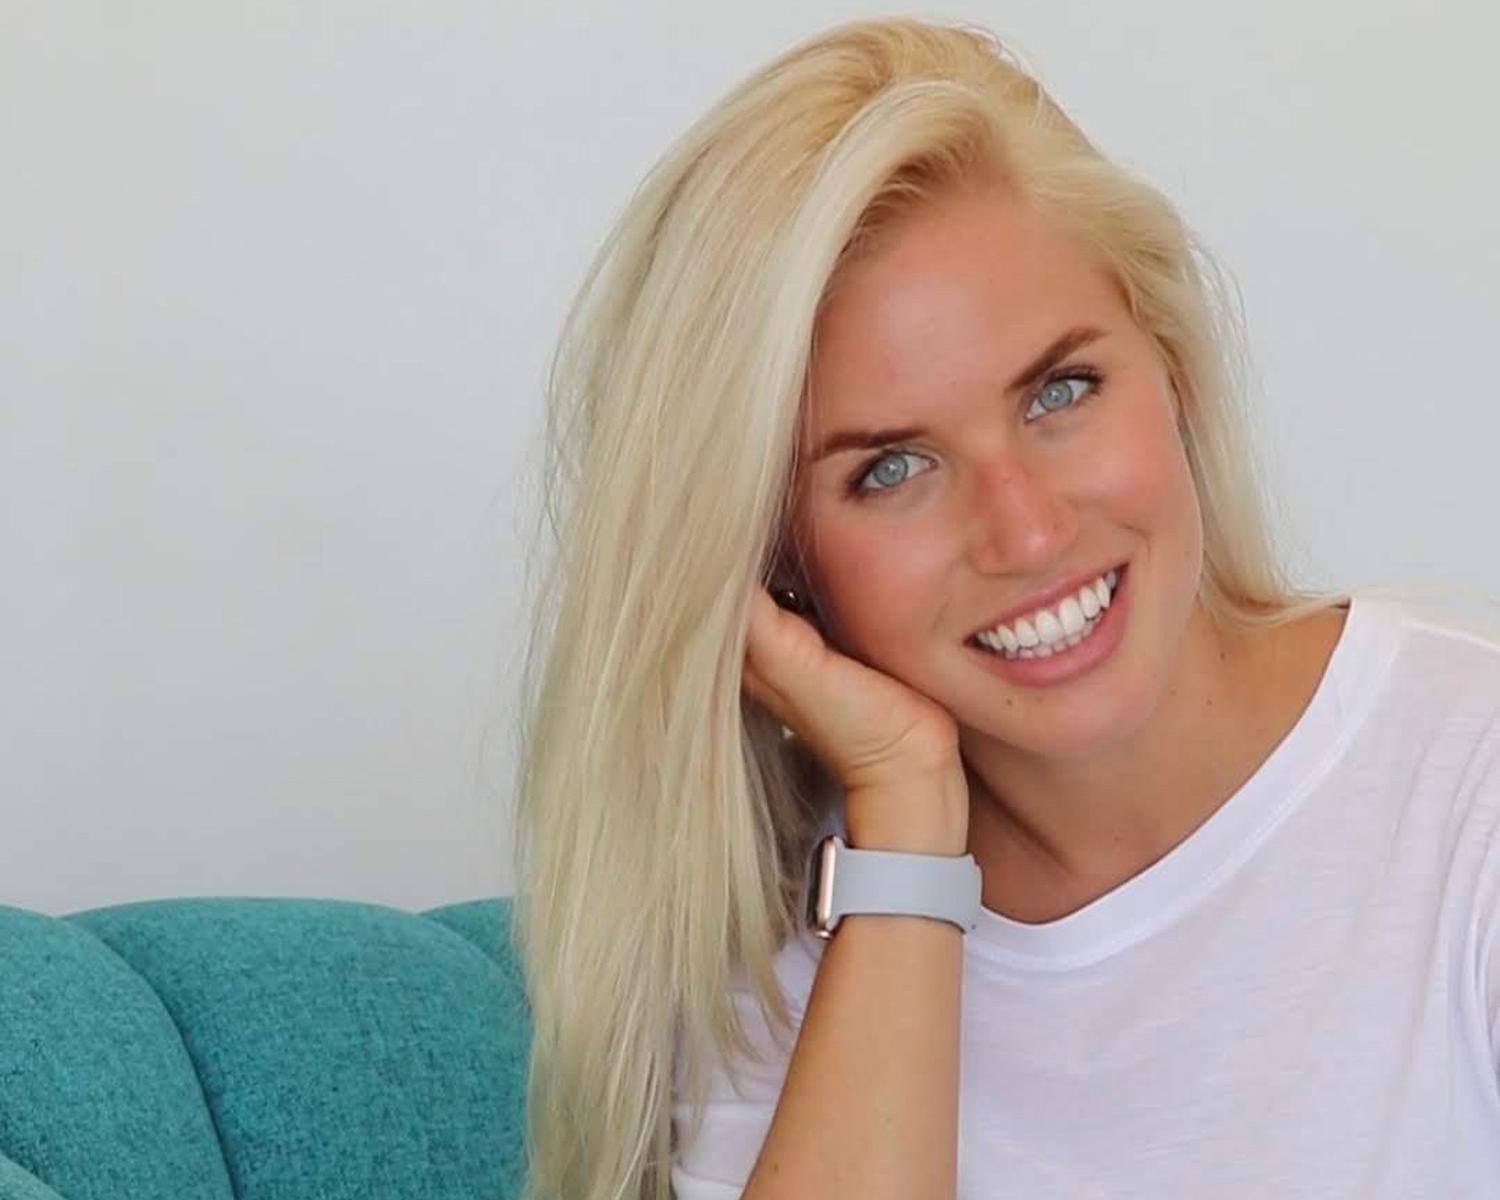 Cecilia Rollen is a wellness blogger and nutrition and holistic lifestyle coach